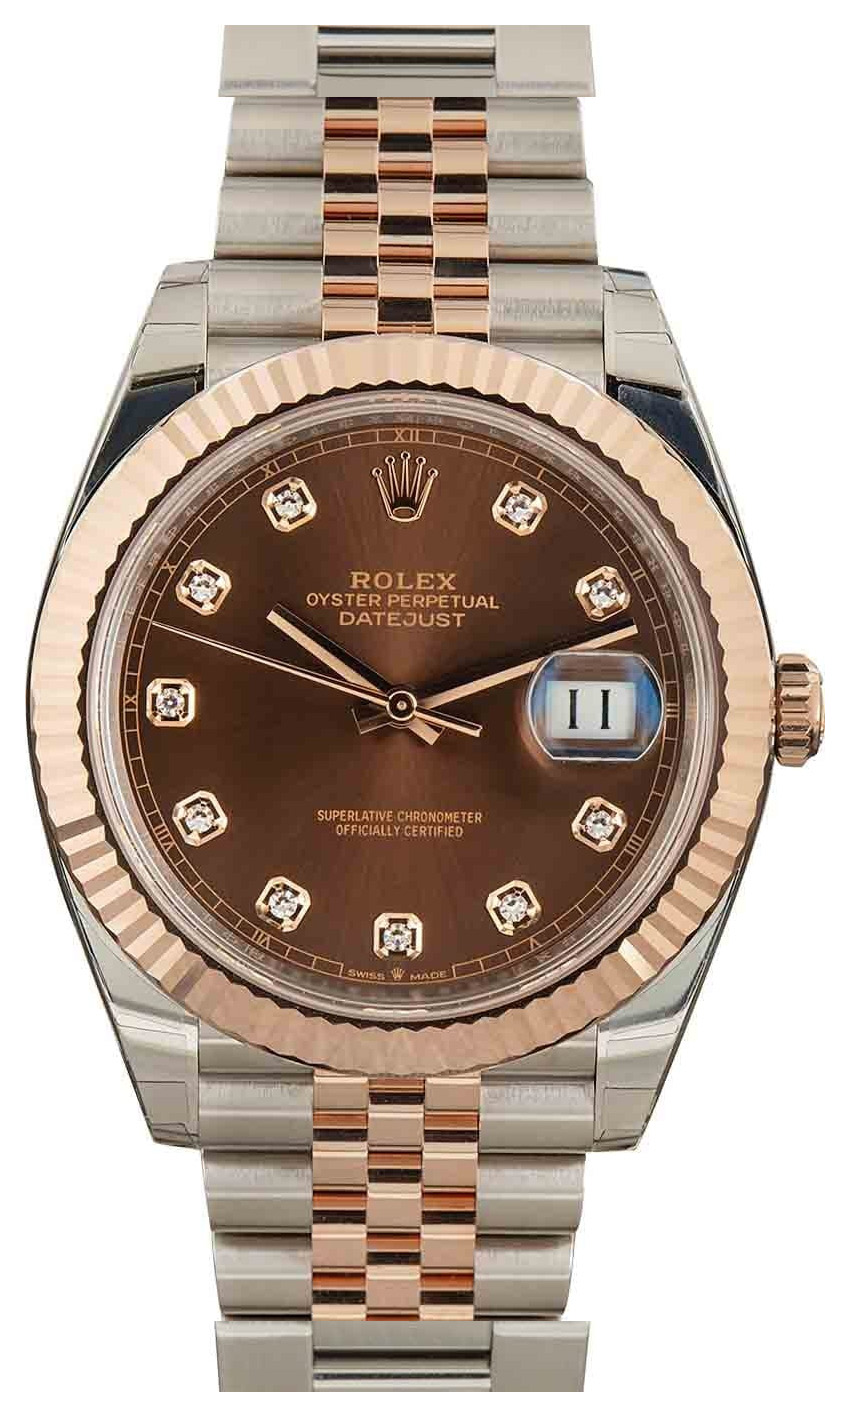 The Evolution of the Rolex Datejust: From 1945 to Now